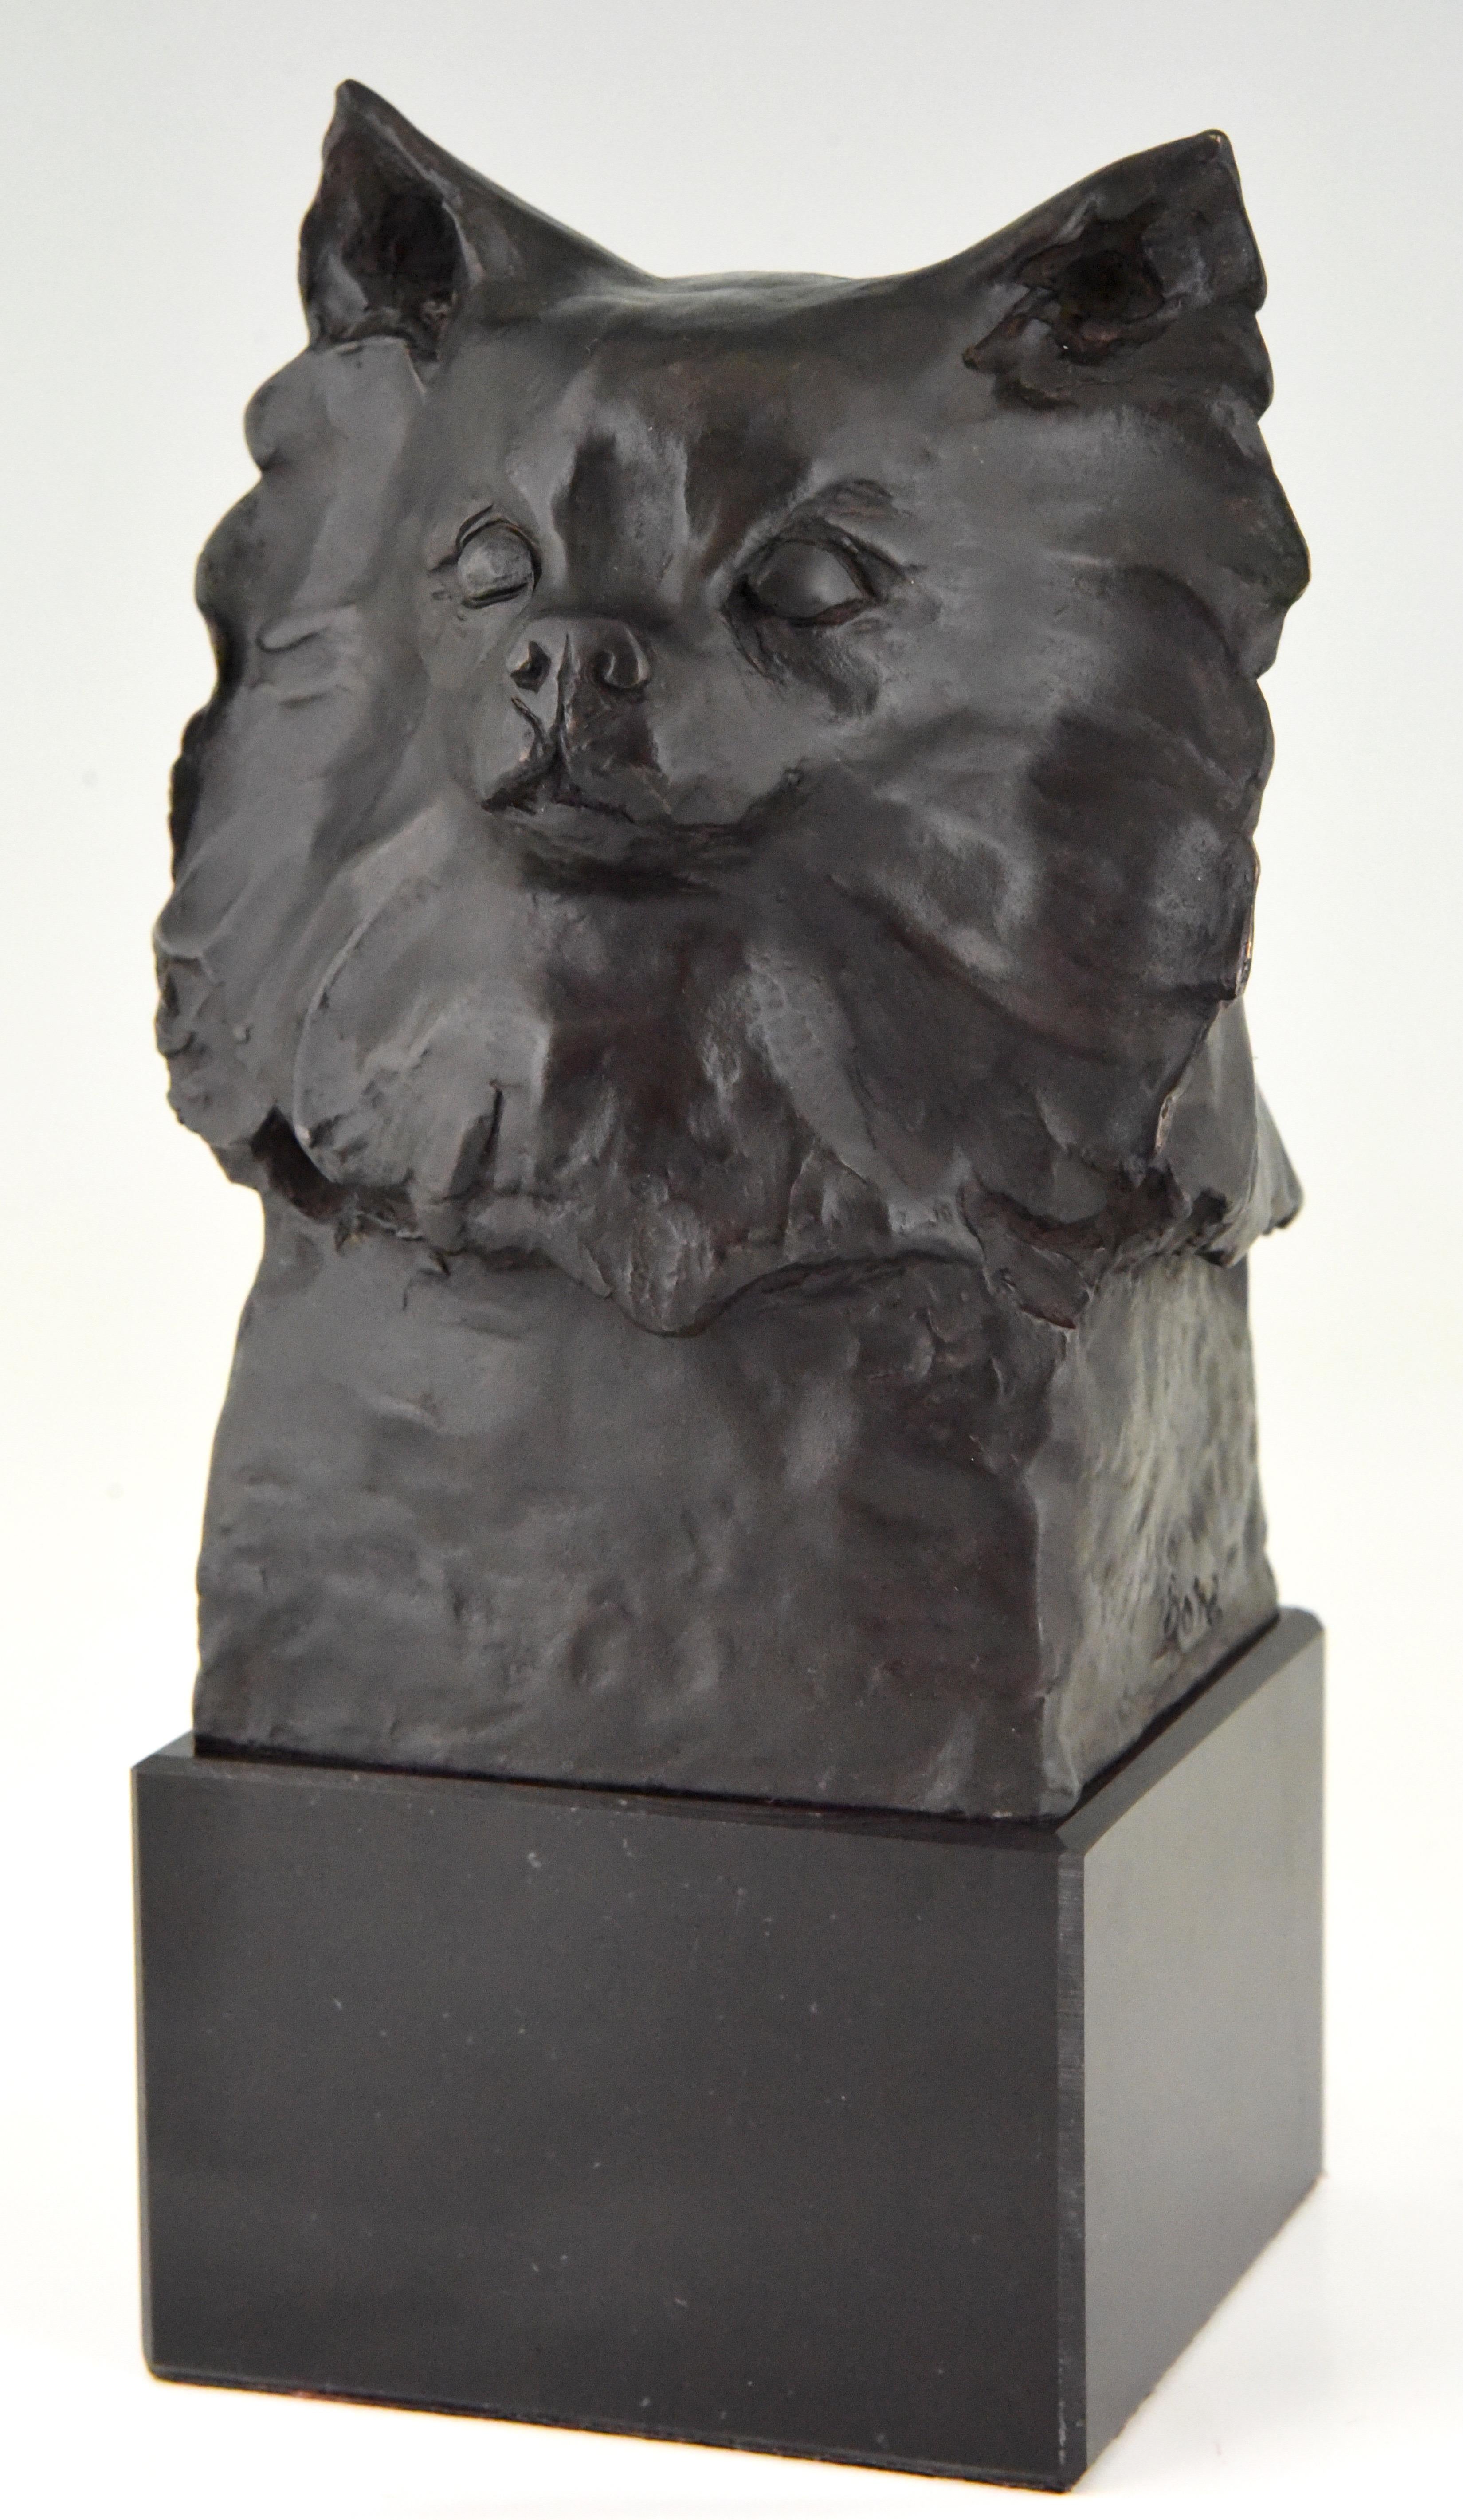 Art Deco bronze bust of a dog, Chihuahua, Pomeranian or Pomchi.
Signed by the German artist Bona with the foundry mark of Brandstetter from Munich. Bronze with black patina on black marble base, circa 1930.